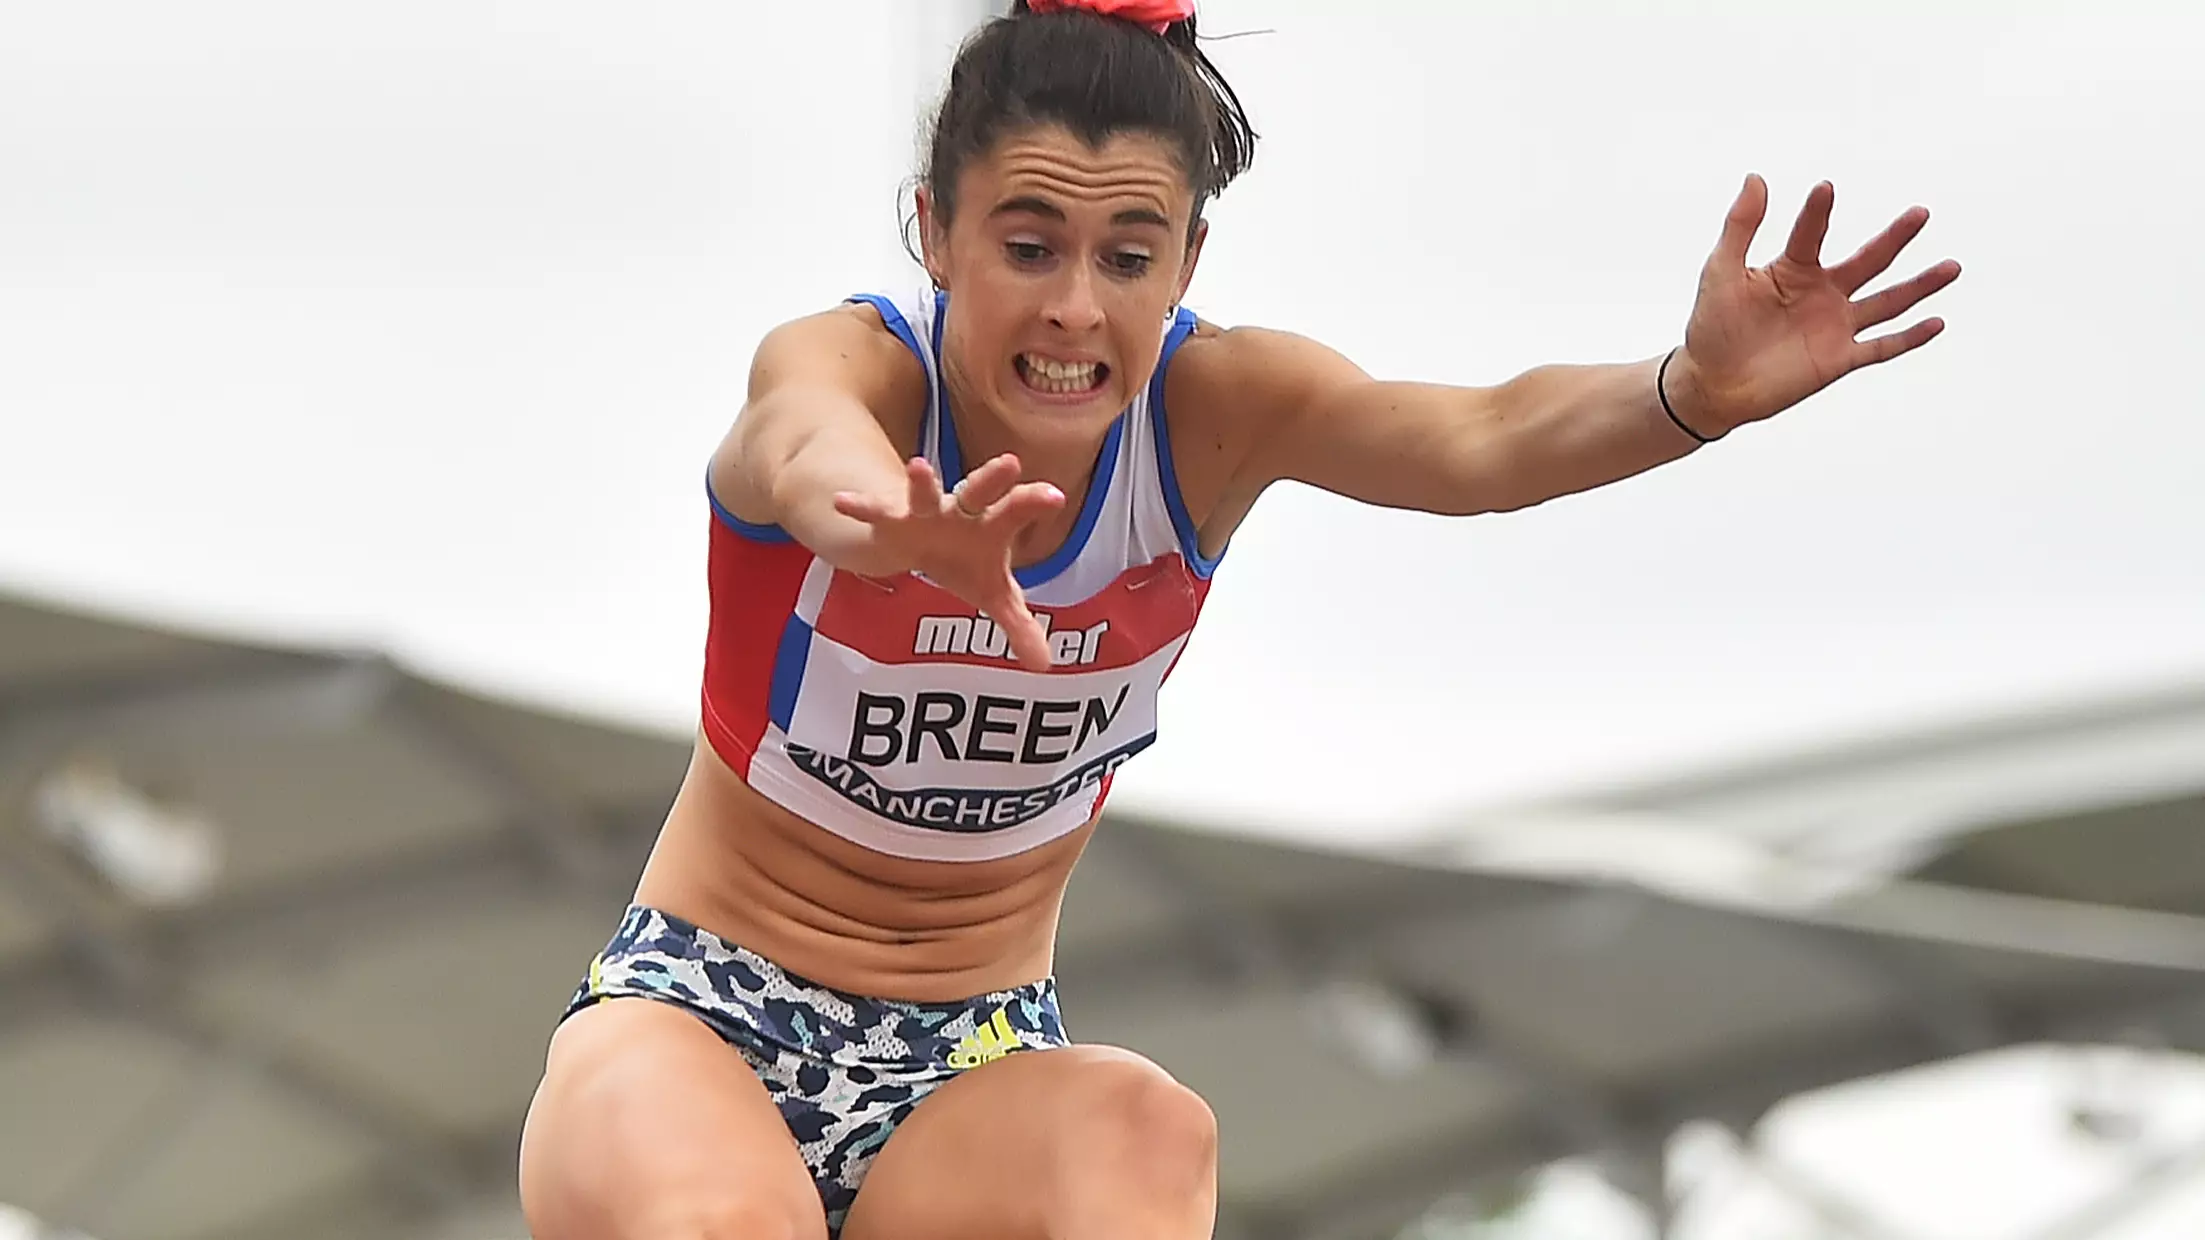 Fury As British Paralympian Says She Was Told Her Shorts Were 'Too Short' For Competition